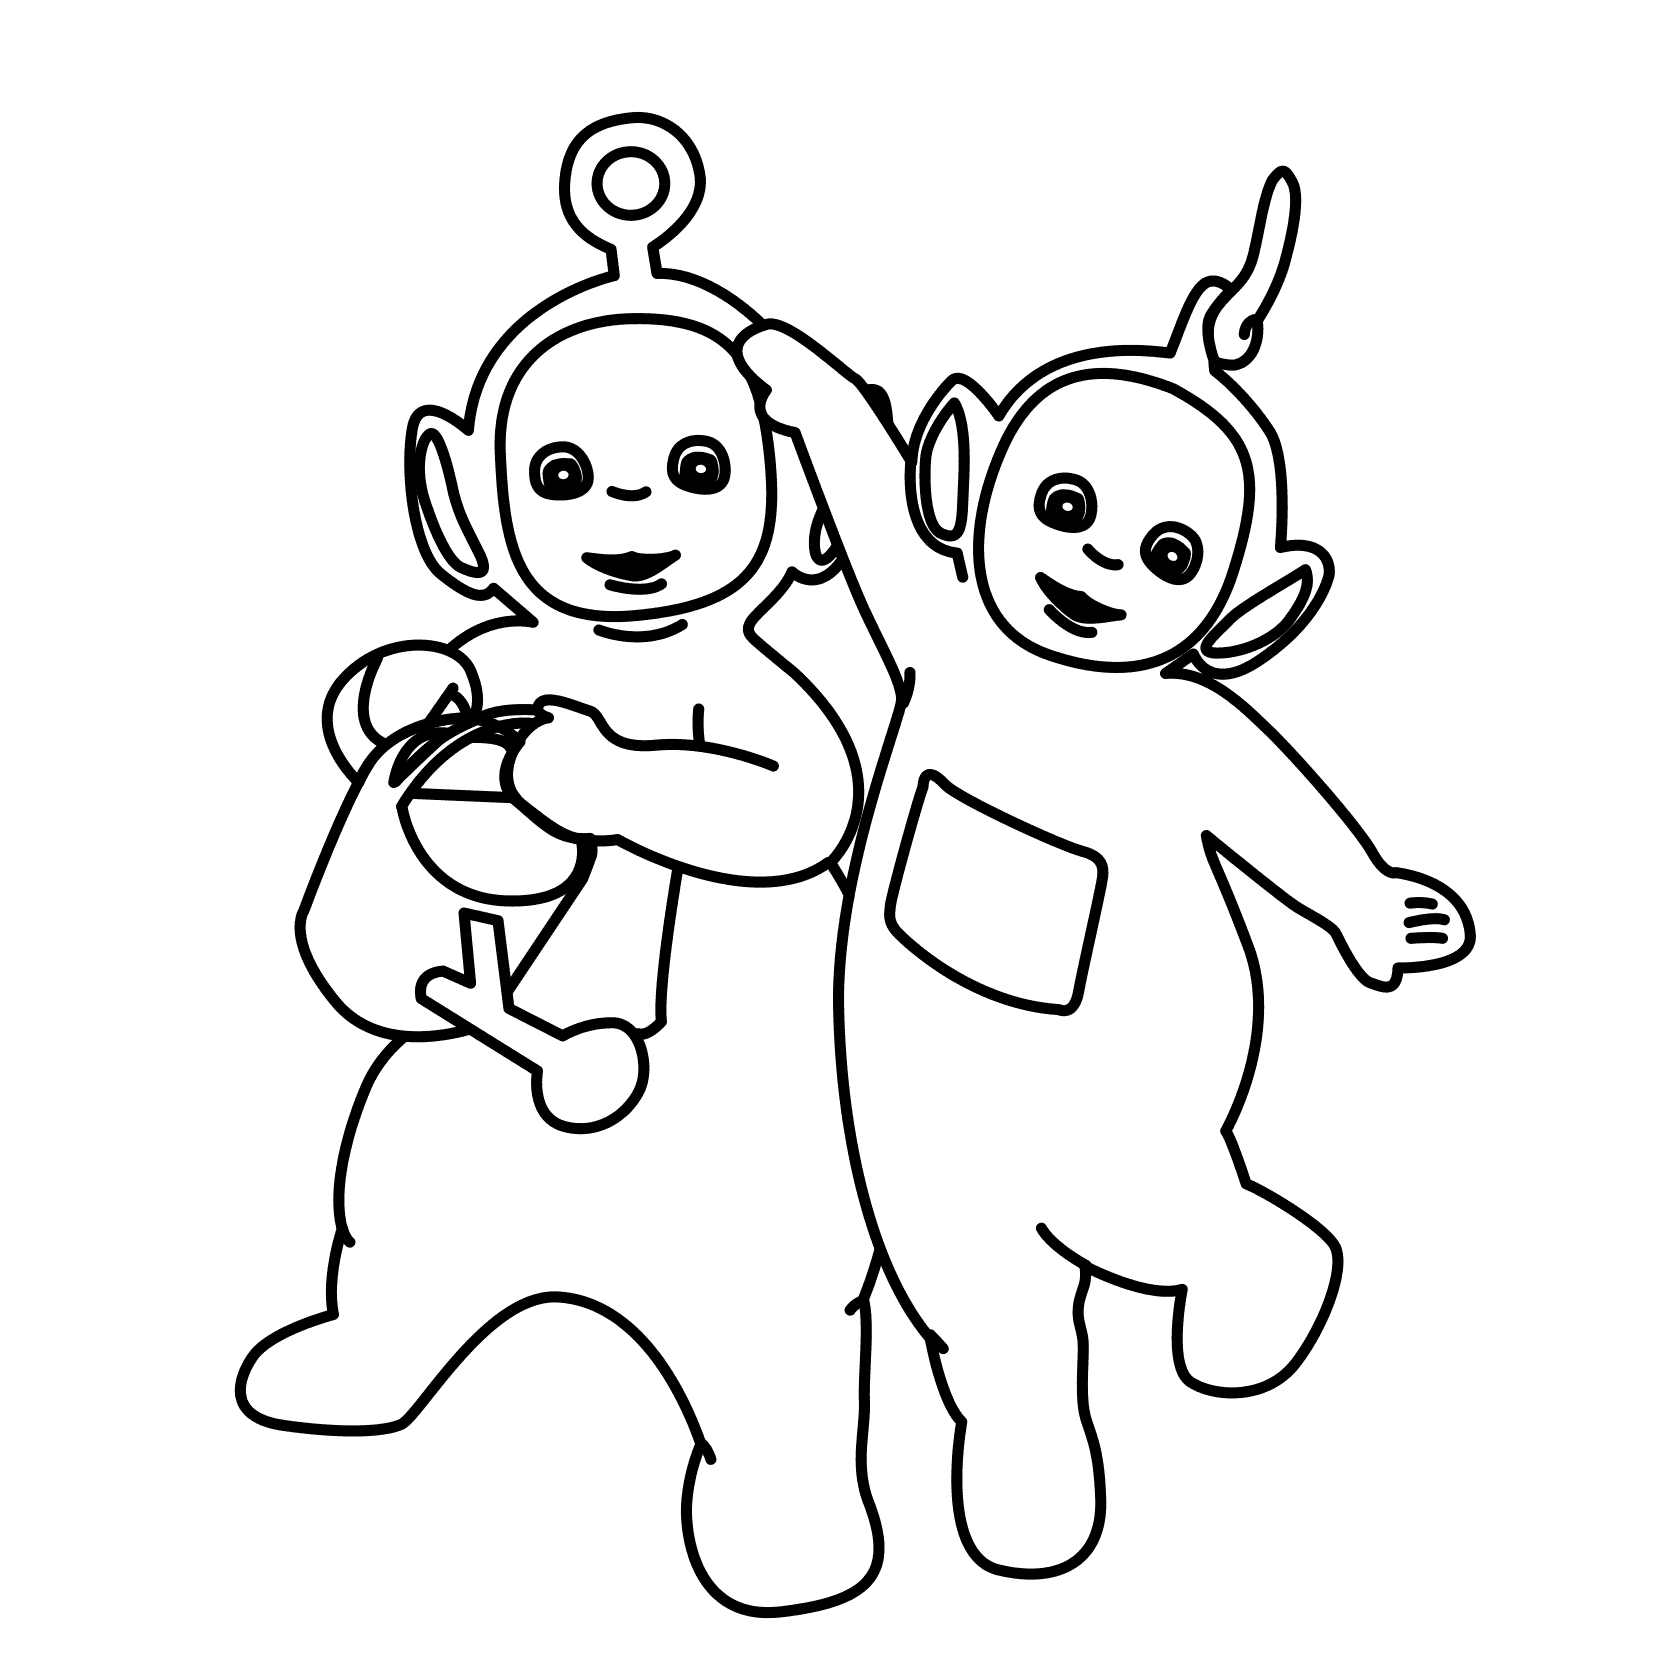 teletubbies colouring pages free printable teletubbies coloring pages for kids pages teletubbies colouring 1 1